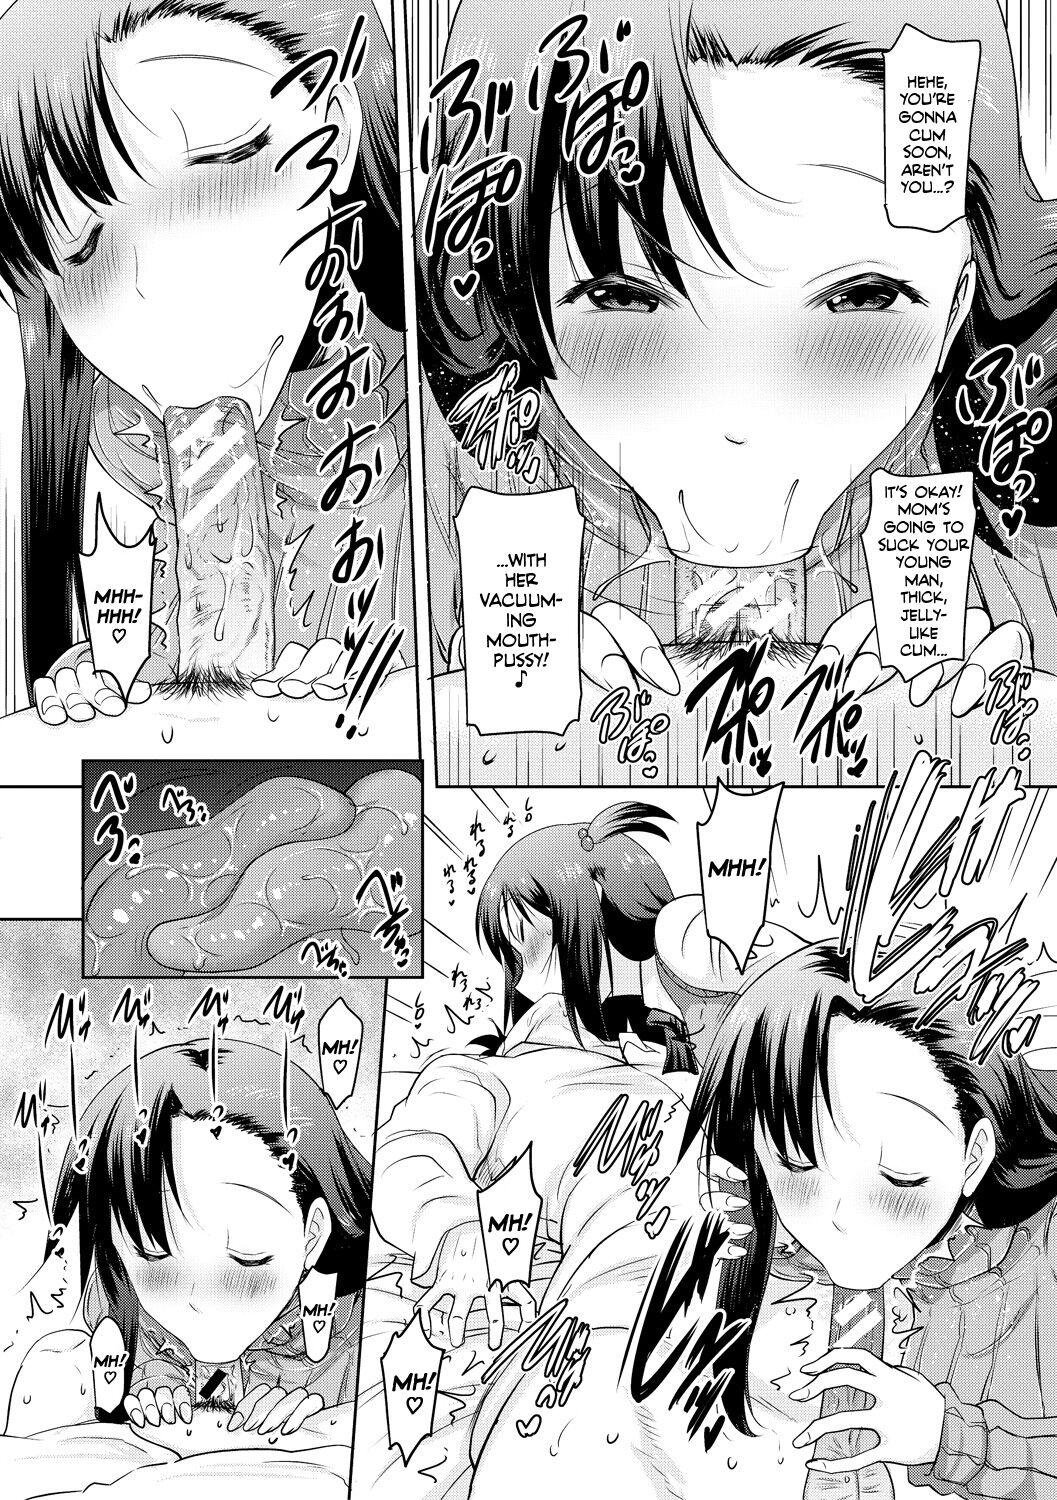 [Pony-R] I Can't Live Without My Little Sister's Tongue Chapter 01-02 + Secret Baby-making Sex with a Big-titted Mother and Daughter! (Kyonyuu Oyako no Shita to Shikyuu ni Renzoku Shasei) [English] [Team Rabu2] [Digital] 50